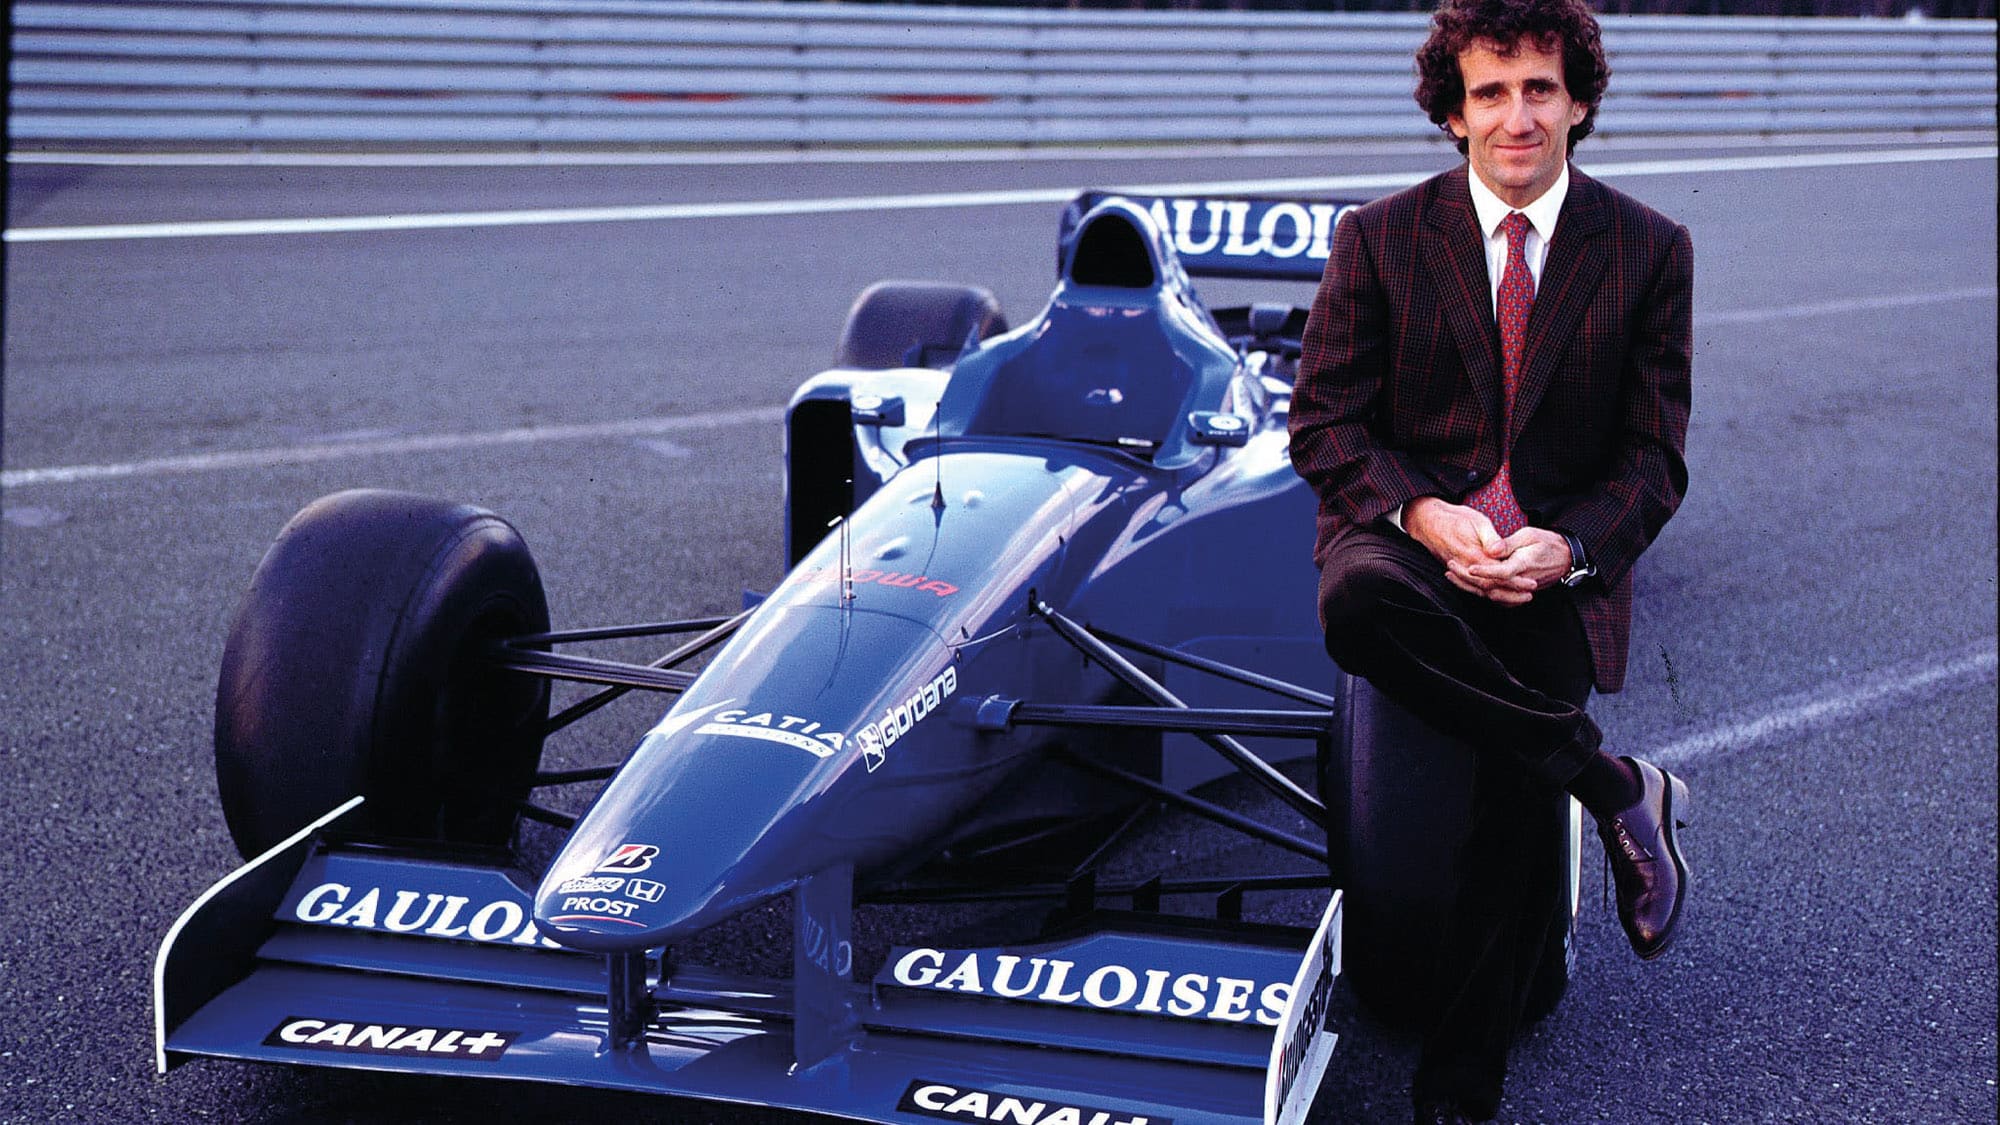 Alain Prost with the Prost JS45 F1 car